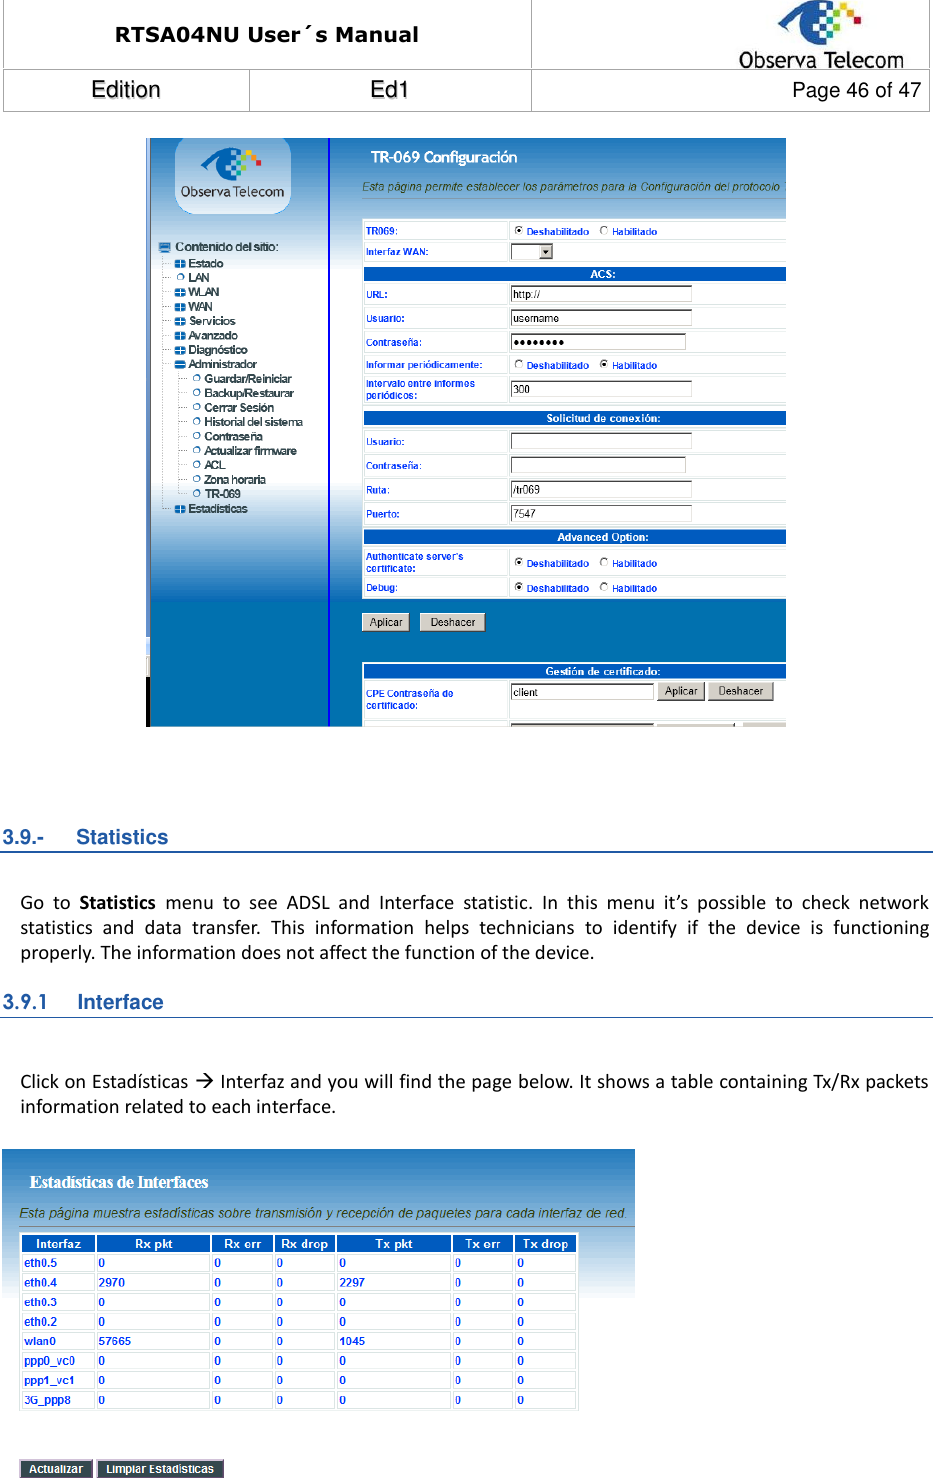 RTSA04NU User´s Manual  EEddiittiioonn  EEdd11  Page 46 of 47     3.9.-   Statistics  Go  to  Statistics  menu  to  see  ADSL  and  Interface  statistic.  In  this  menu  it’s  possible  to  check  network statistics  and  data  transfer.  This  information  helps  technicians  to  identify  if  the  device  is  functioning properly. The information does not affect the function of the device. 3.9.1  Interface  Click on Estadísticas  Interfaz and you will find the page below. It shows a table containing Tx/Rx packets information related to each interface.     